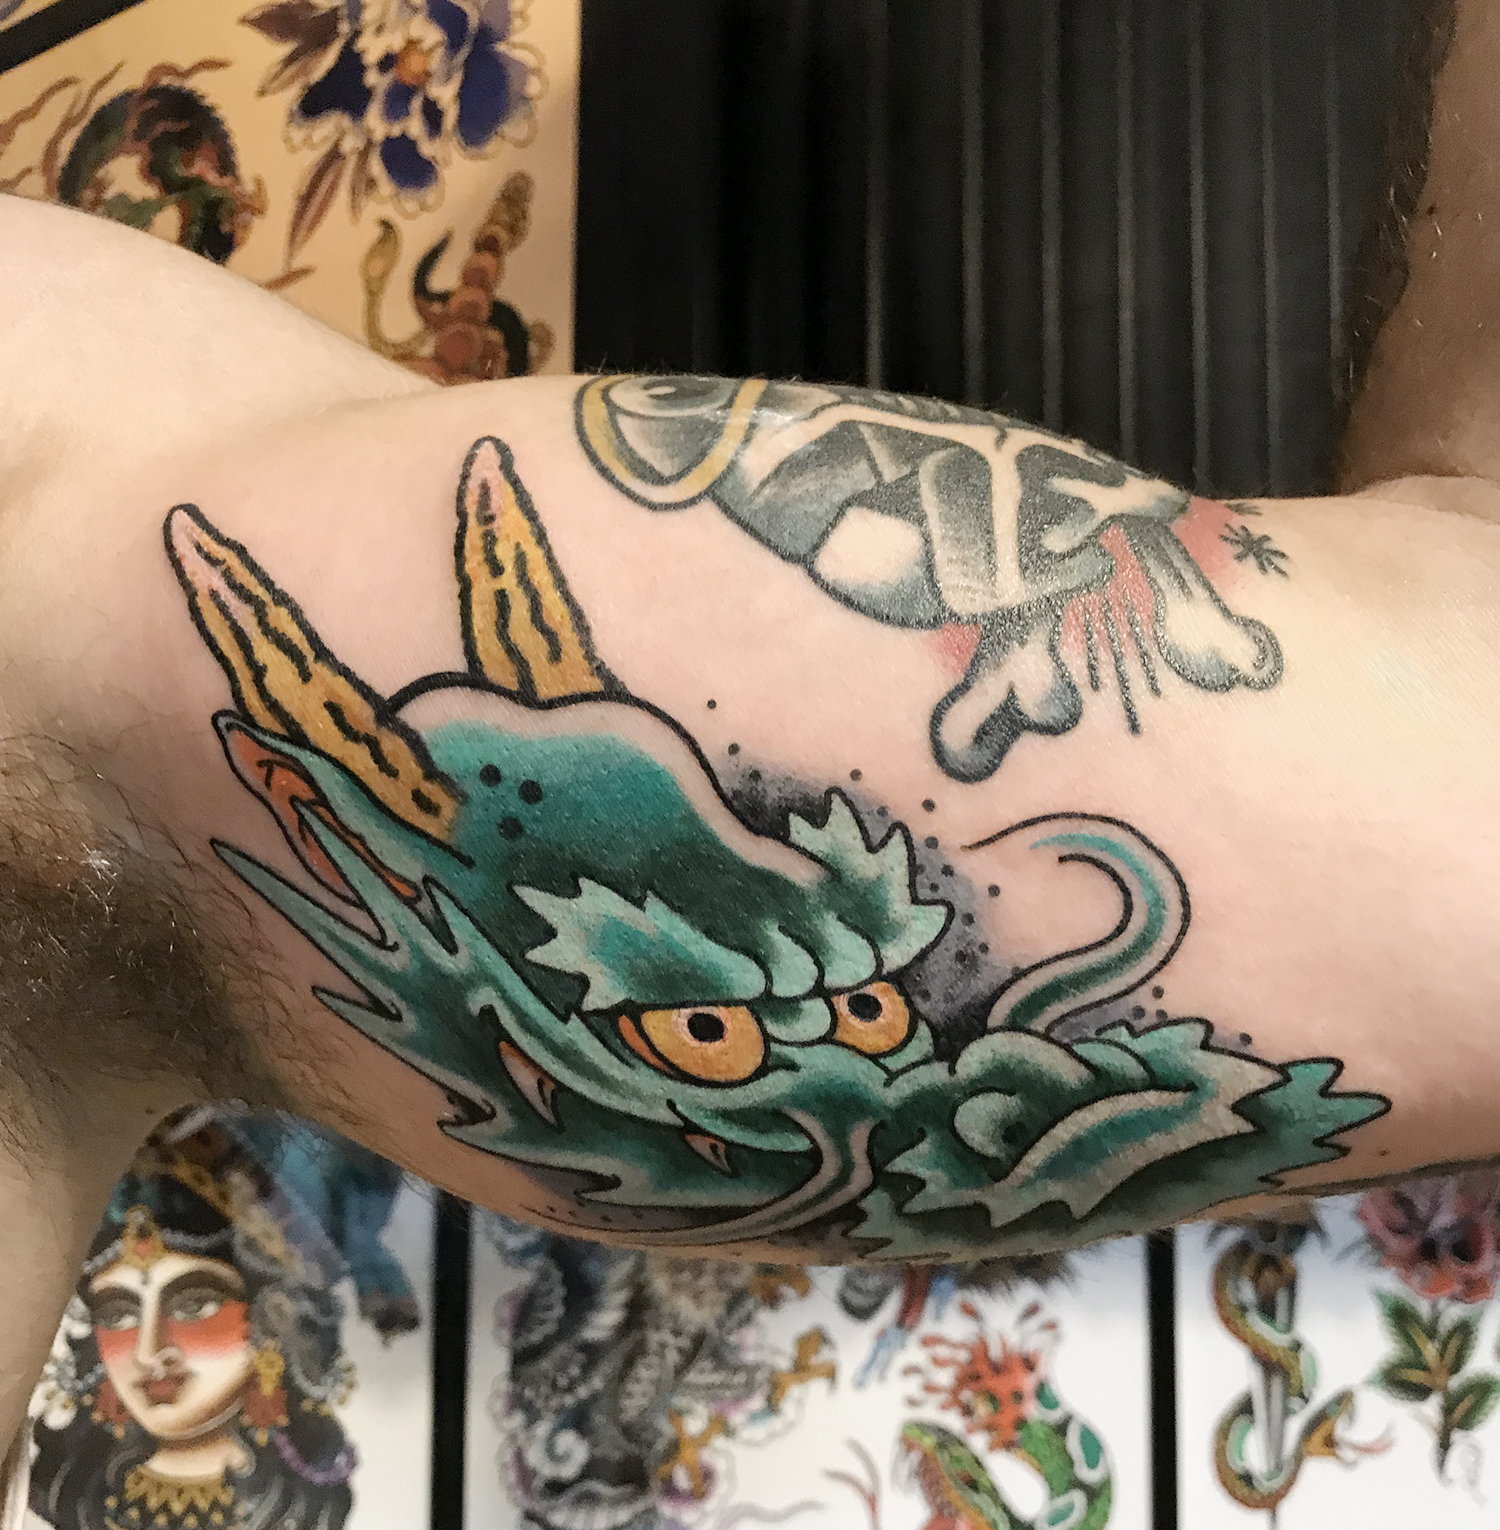 Dragon tattoo, japanese style by max may